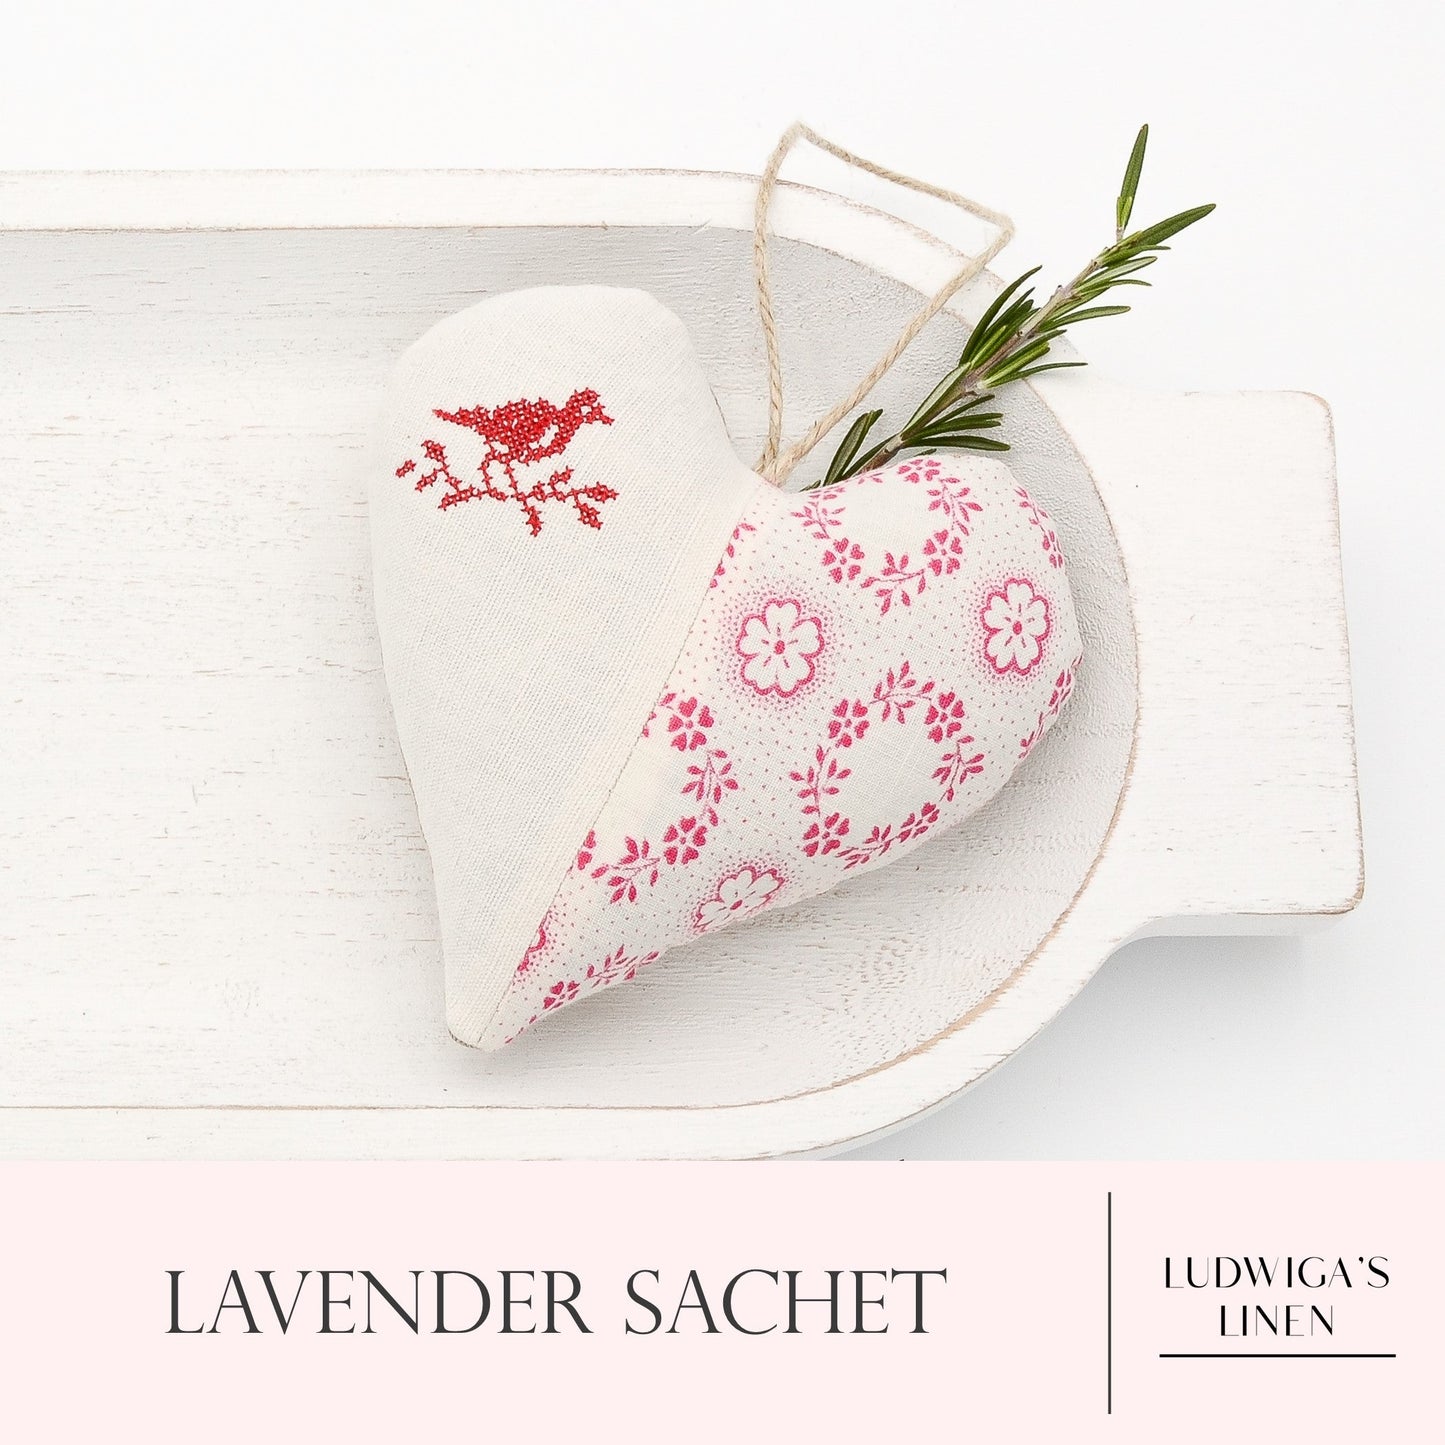 Antique/vintage German cotton and European white linen lavender sachet heart with red embroidered heart, hemp twine tie and filled with high quality lavender from Provence France